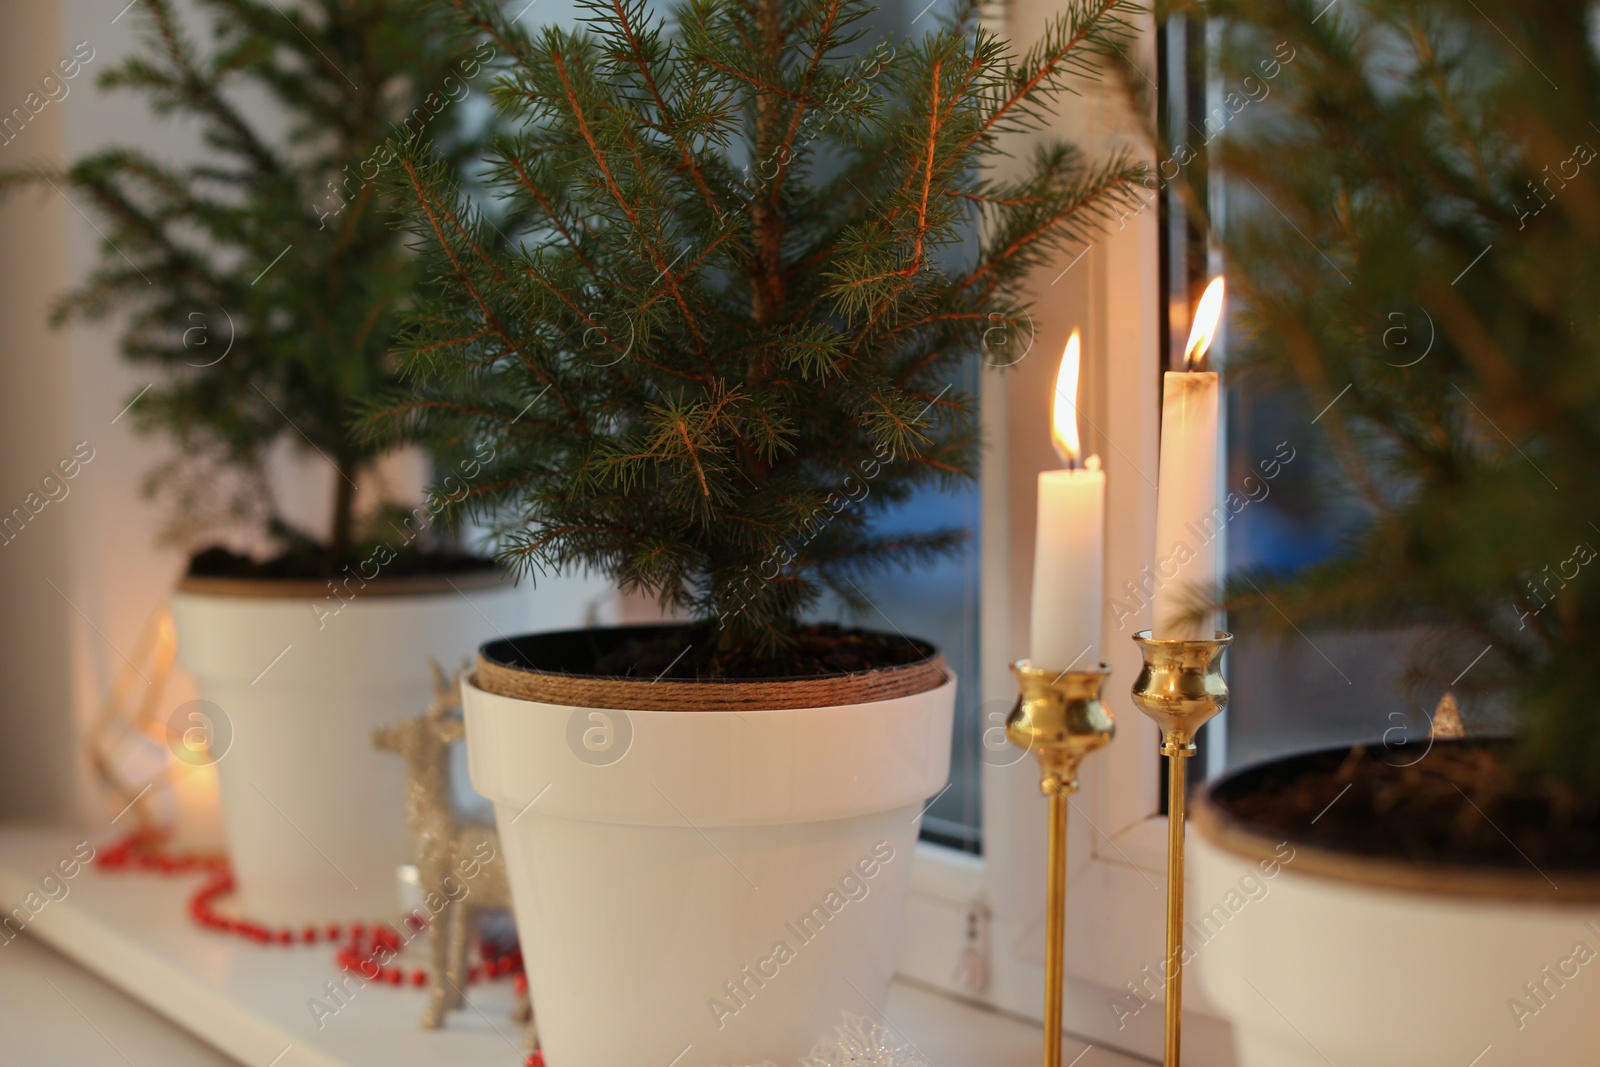 Photo of Small potted fir trees and burning candles on window sill indoors